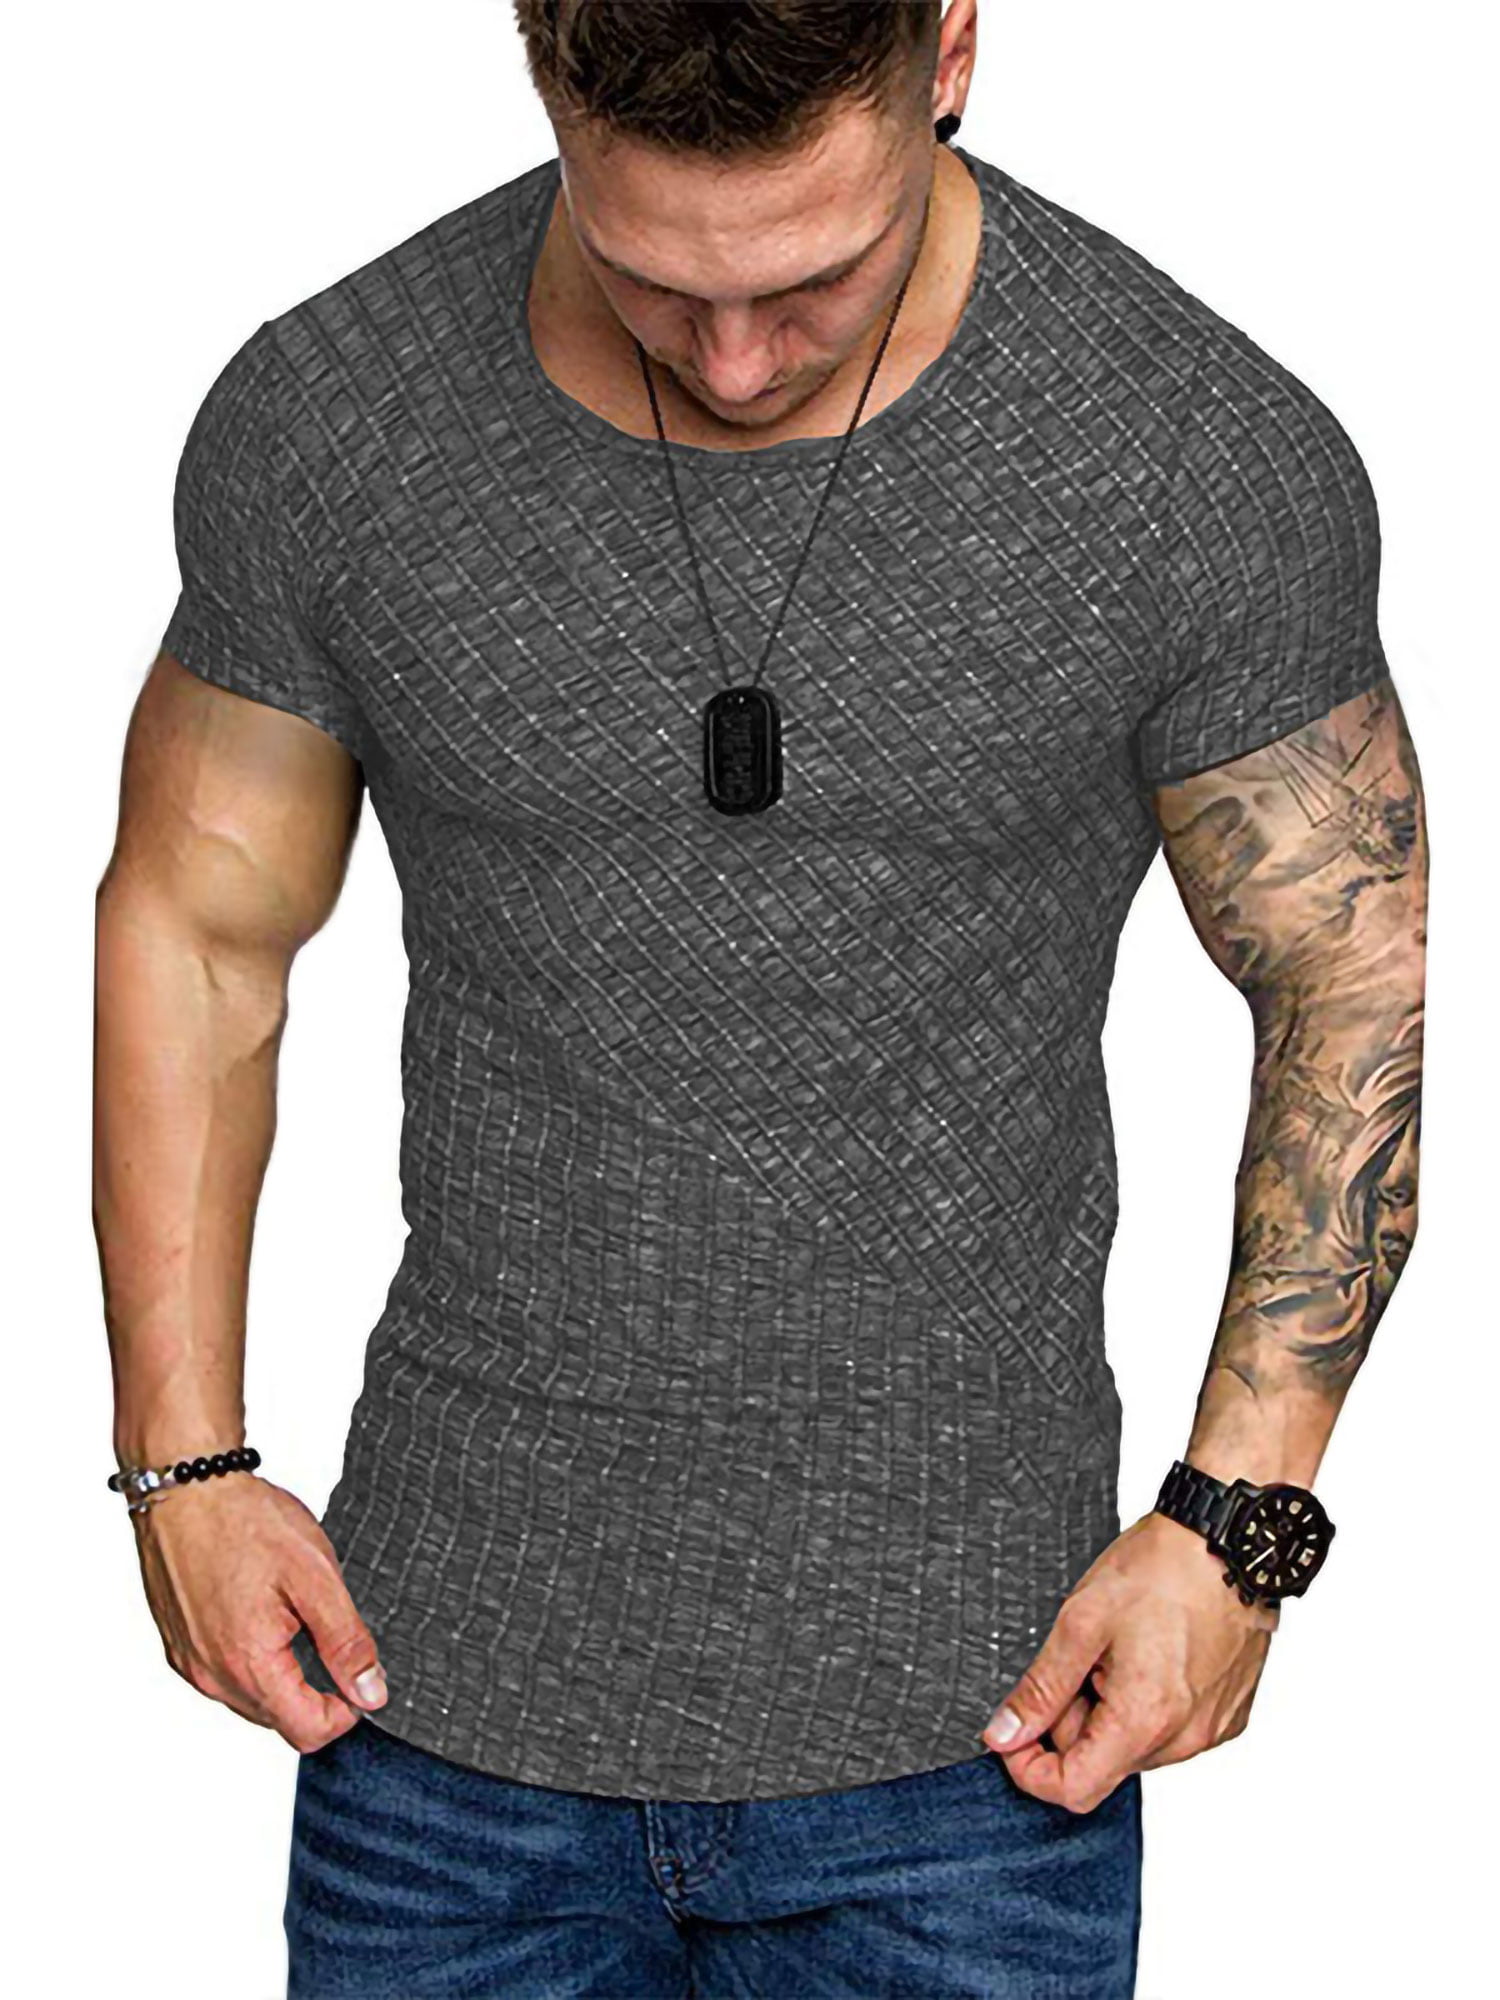 Avamo Big And Tall T Shirt For Men Athletic Sport Running Gym Sport ...